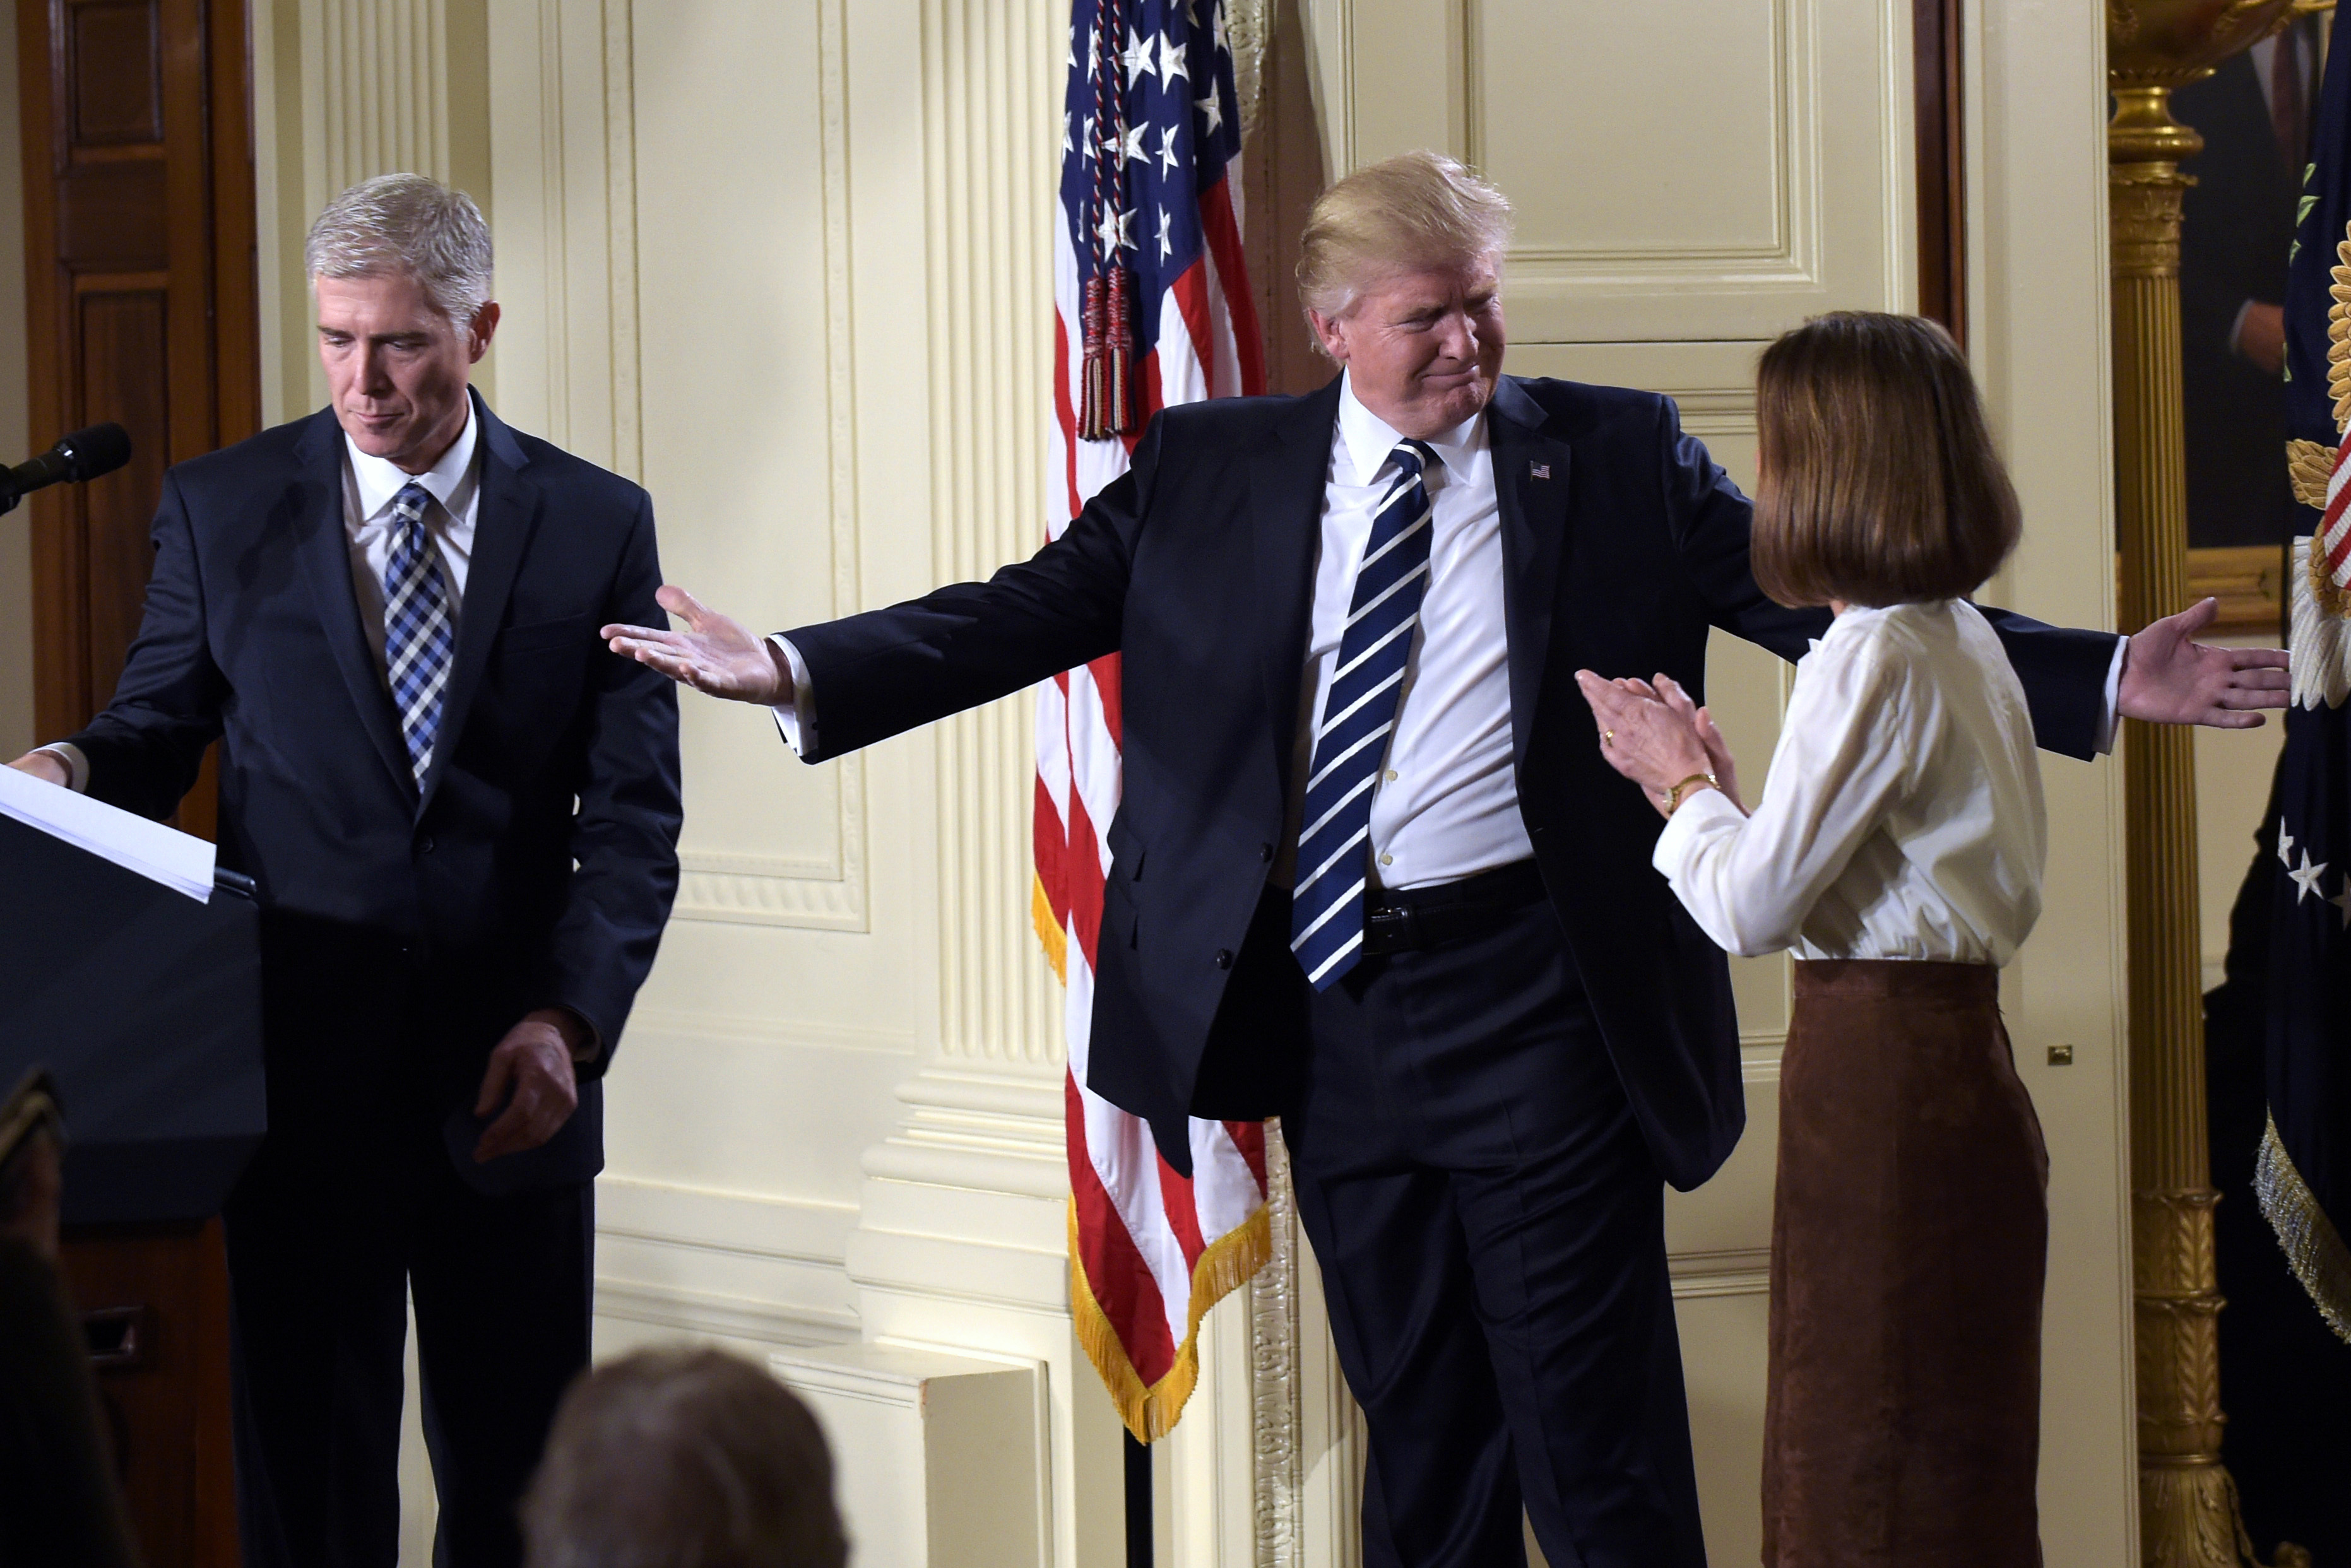 foto : susan walsh : president donald trump gestures toward louise gorsuch after announcing 10th u.s. circuit court of appeals judge neil gorsuch as his choice for supreme court justice during a televised address from the east room of the white house in washington, tuesday, jan. 31, 2017. (ap photo/susan walsh)